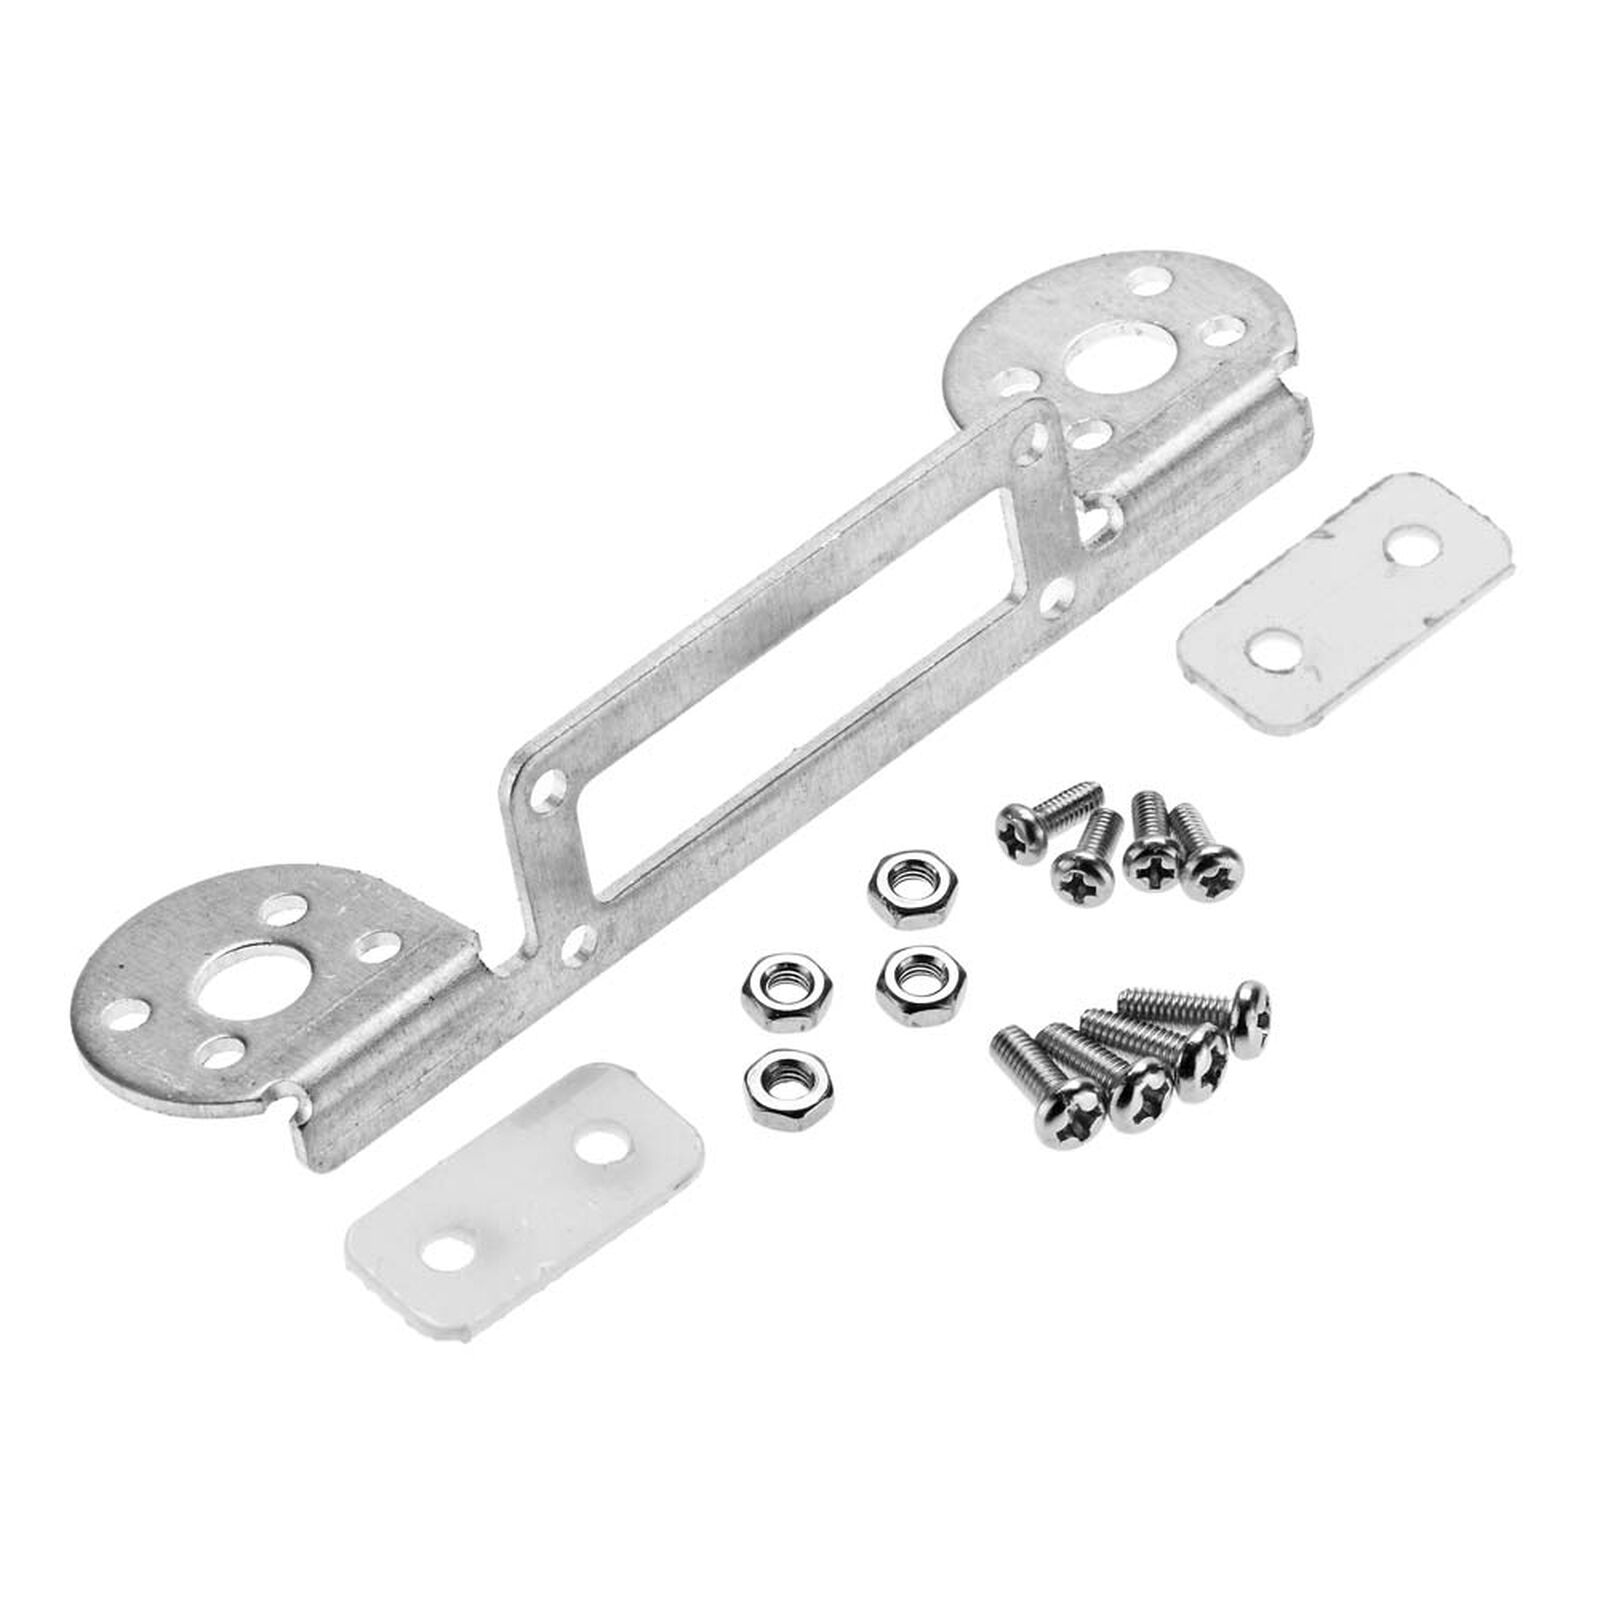 Motor Mount Dual T-270 with Mounting Plate: Wildcat